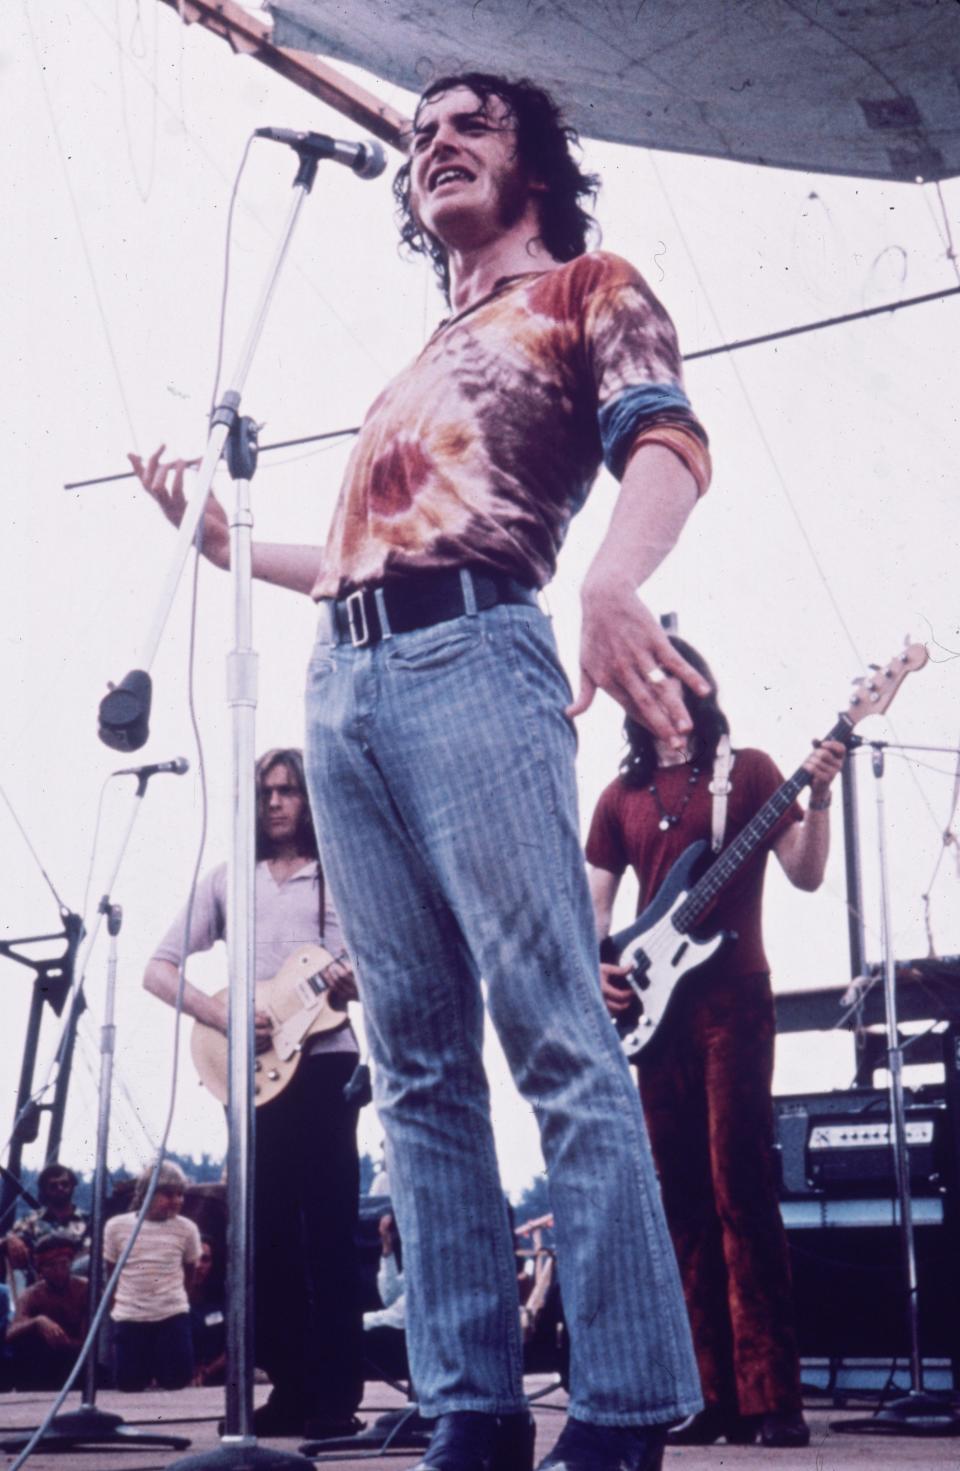 Joe Cocker performs on stage at Woodstock, wearing a tie-dye shirt and striped pants, with his backing band playing behind him